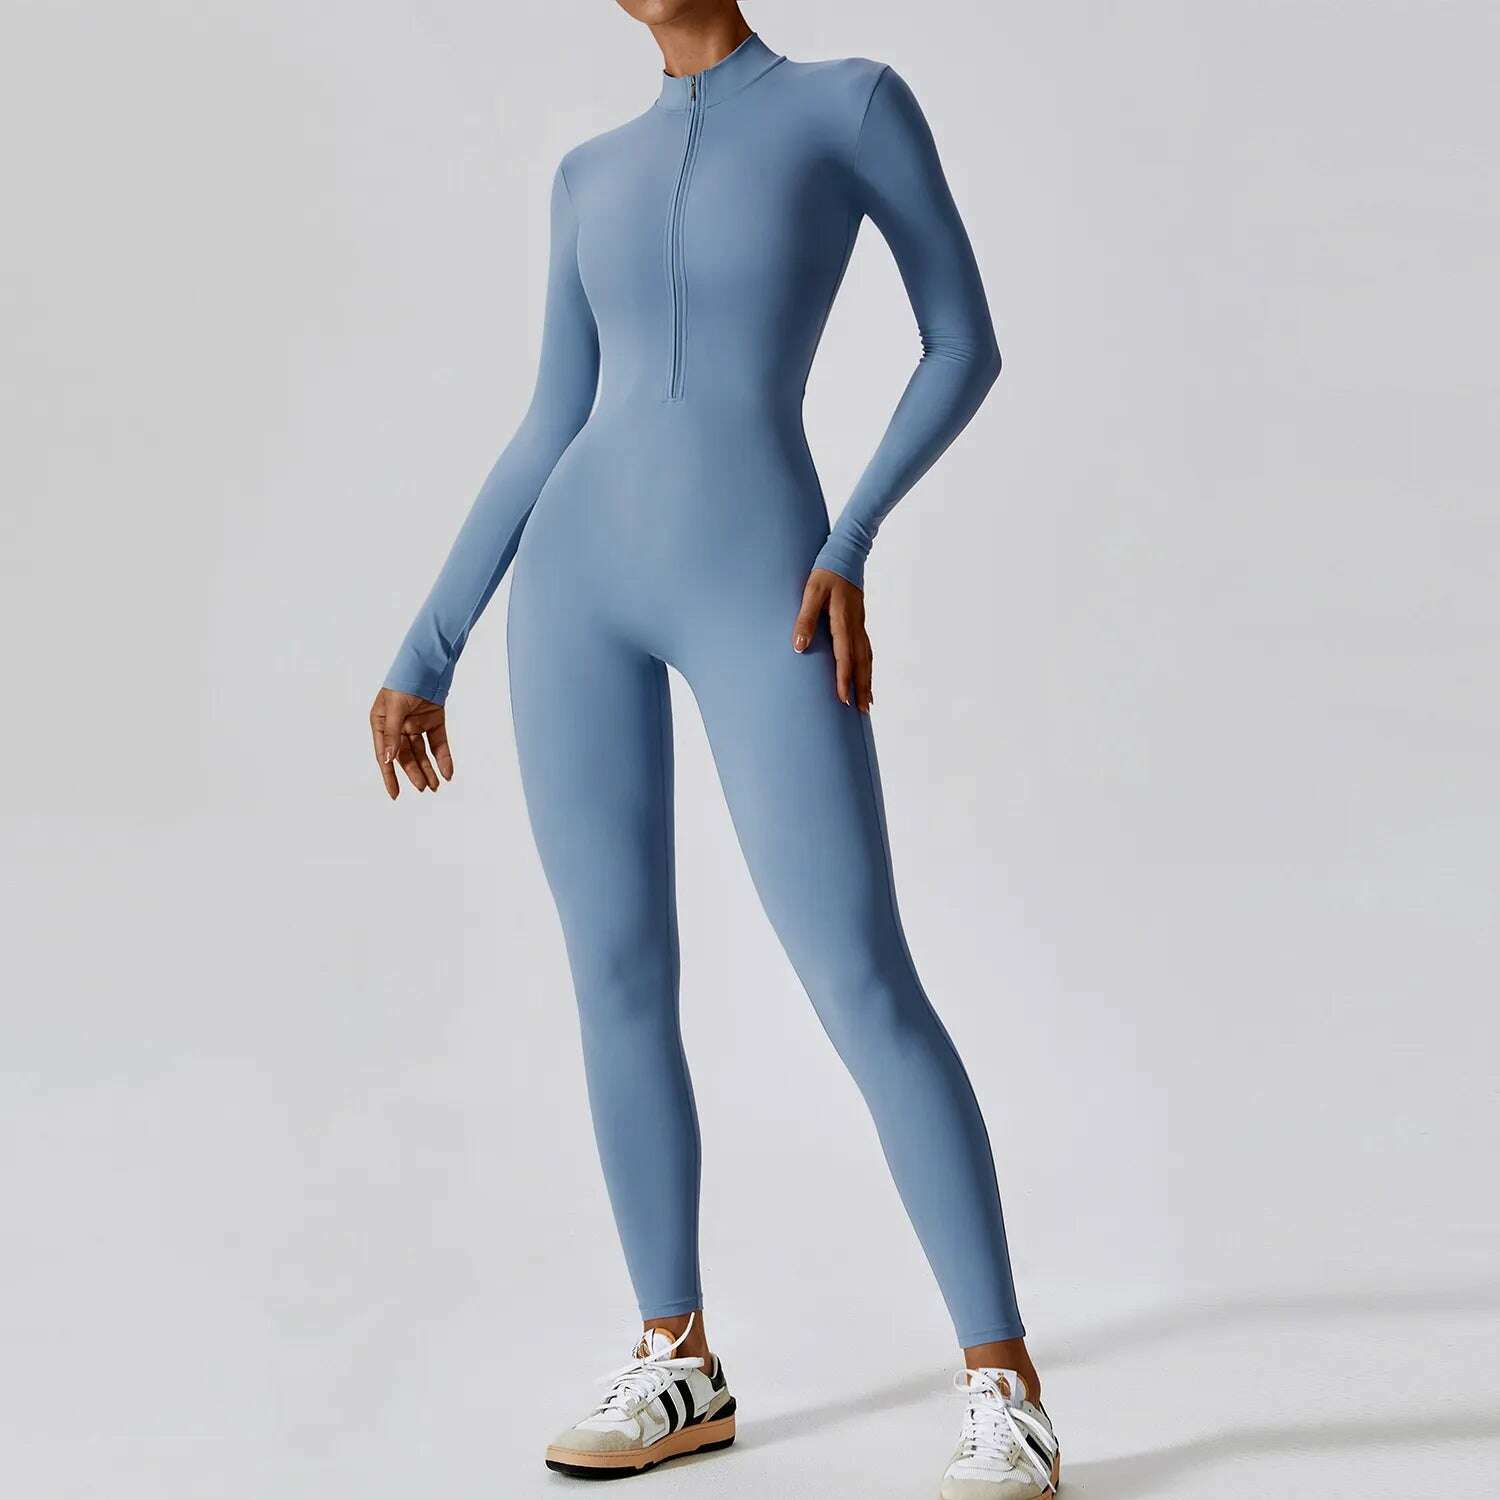 KIMLUD, Yoga Boilersuit Long Sleeved Women's Sportswear Gym Zipper Jumpsuits Workout High-intensity Fitness One-piece Skin-tight Garment, KIMLUD Womens Clothes